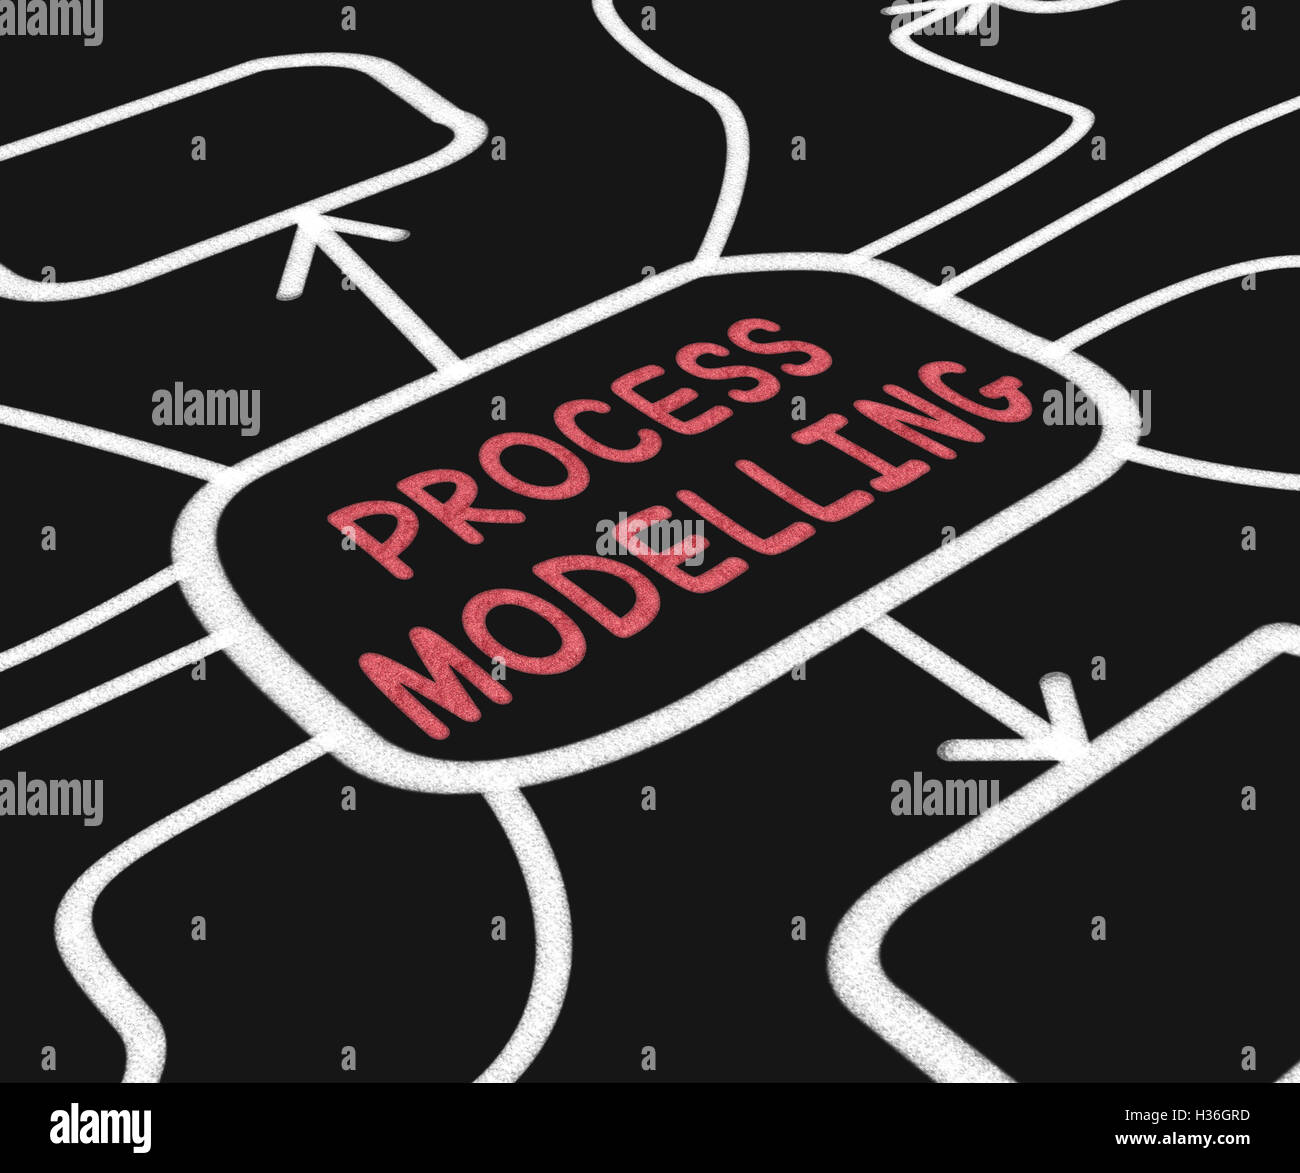 Process Modelling Diagram Shows Illustration Of Business Process Stock Photo